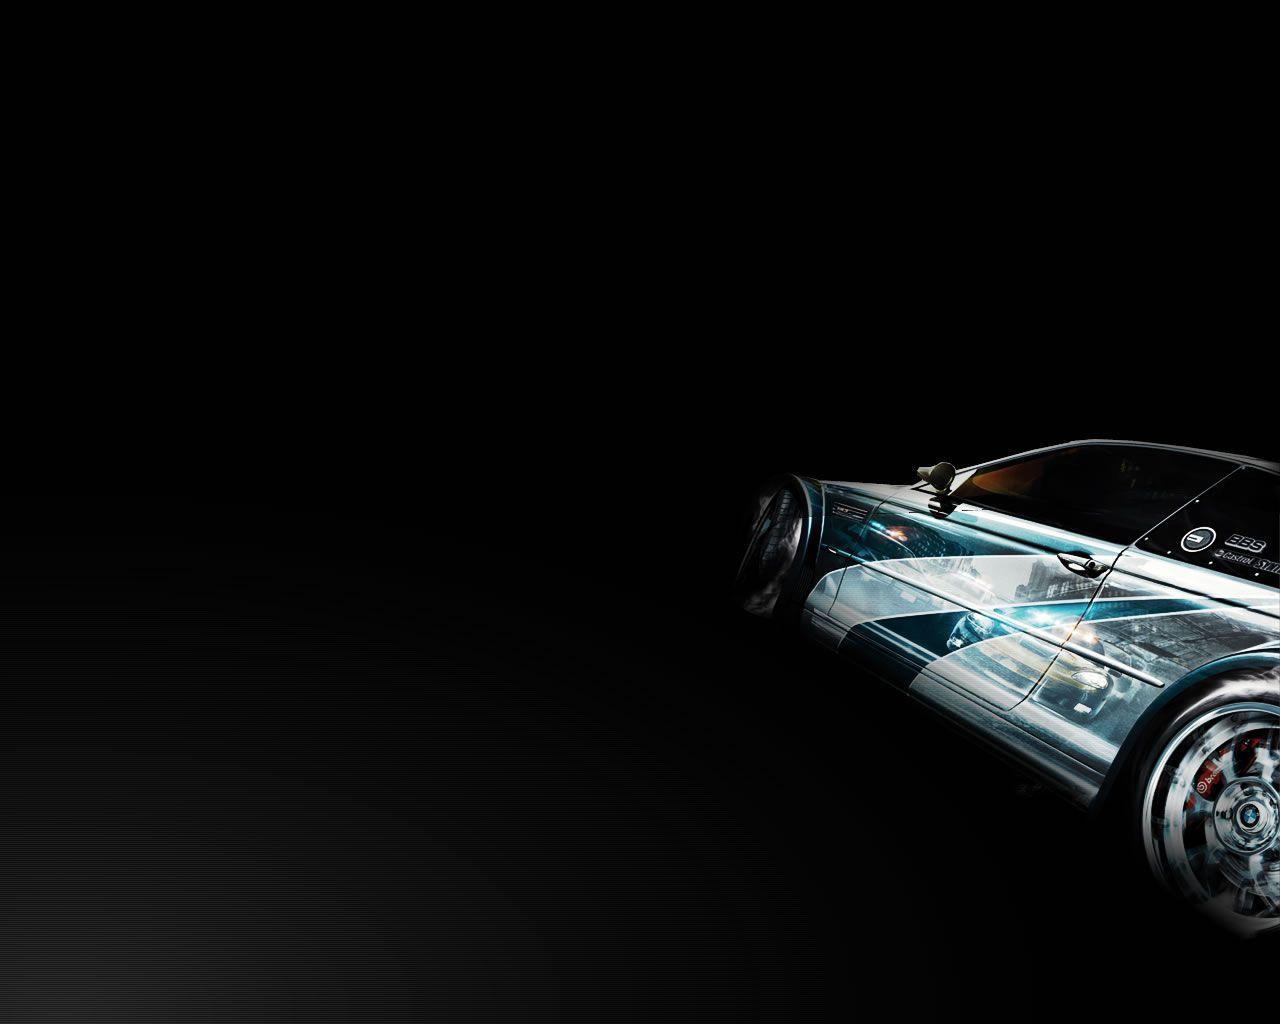 Nfs most wanted wallpaper Gallery